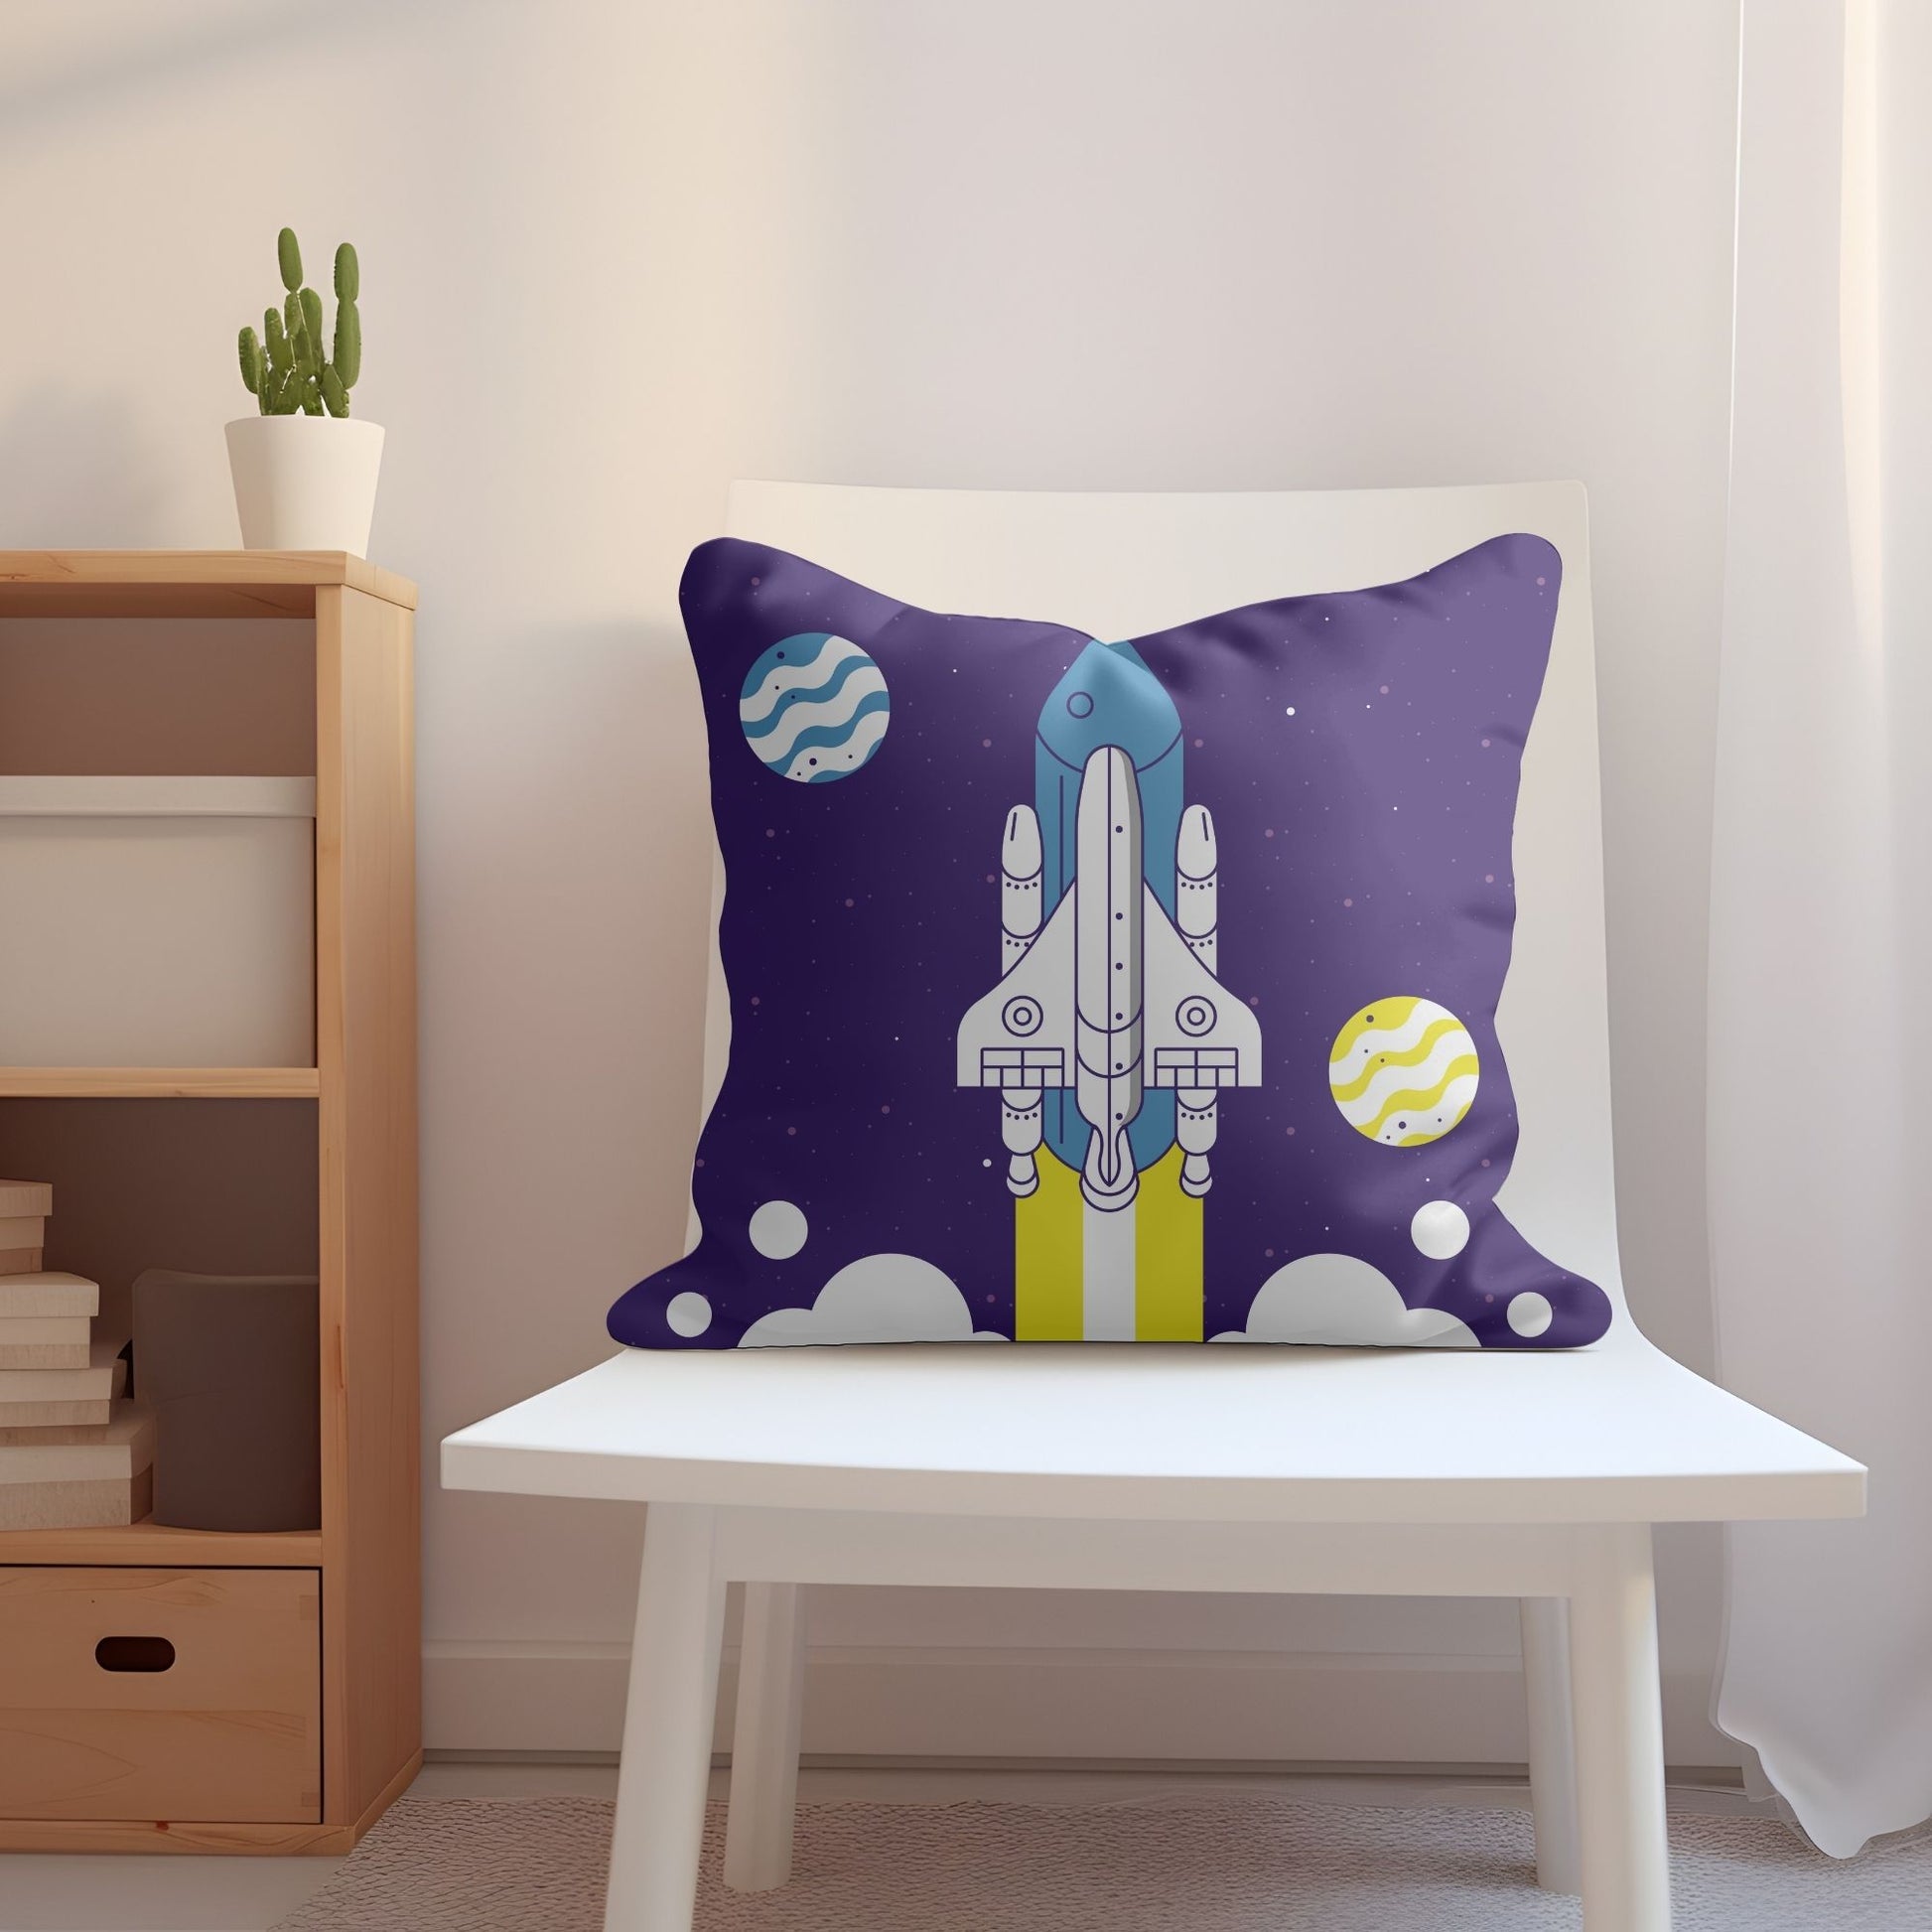 Whimsical kids pillow showcasing a rocket launch for imaginative play.